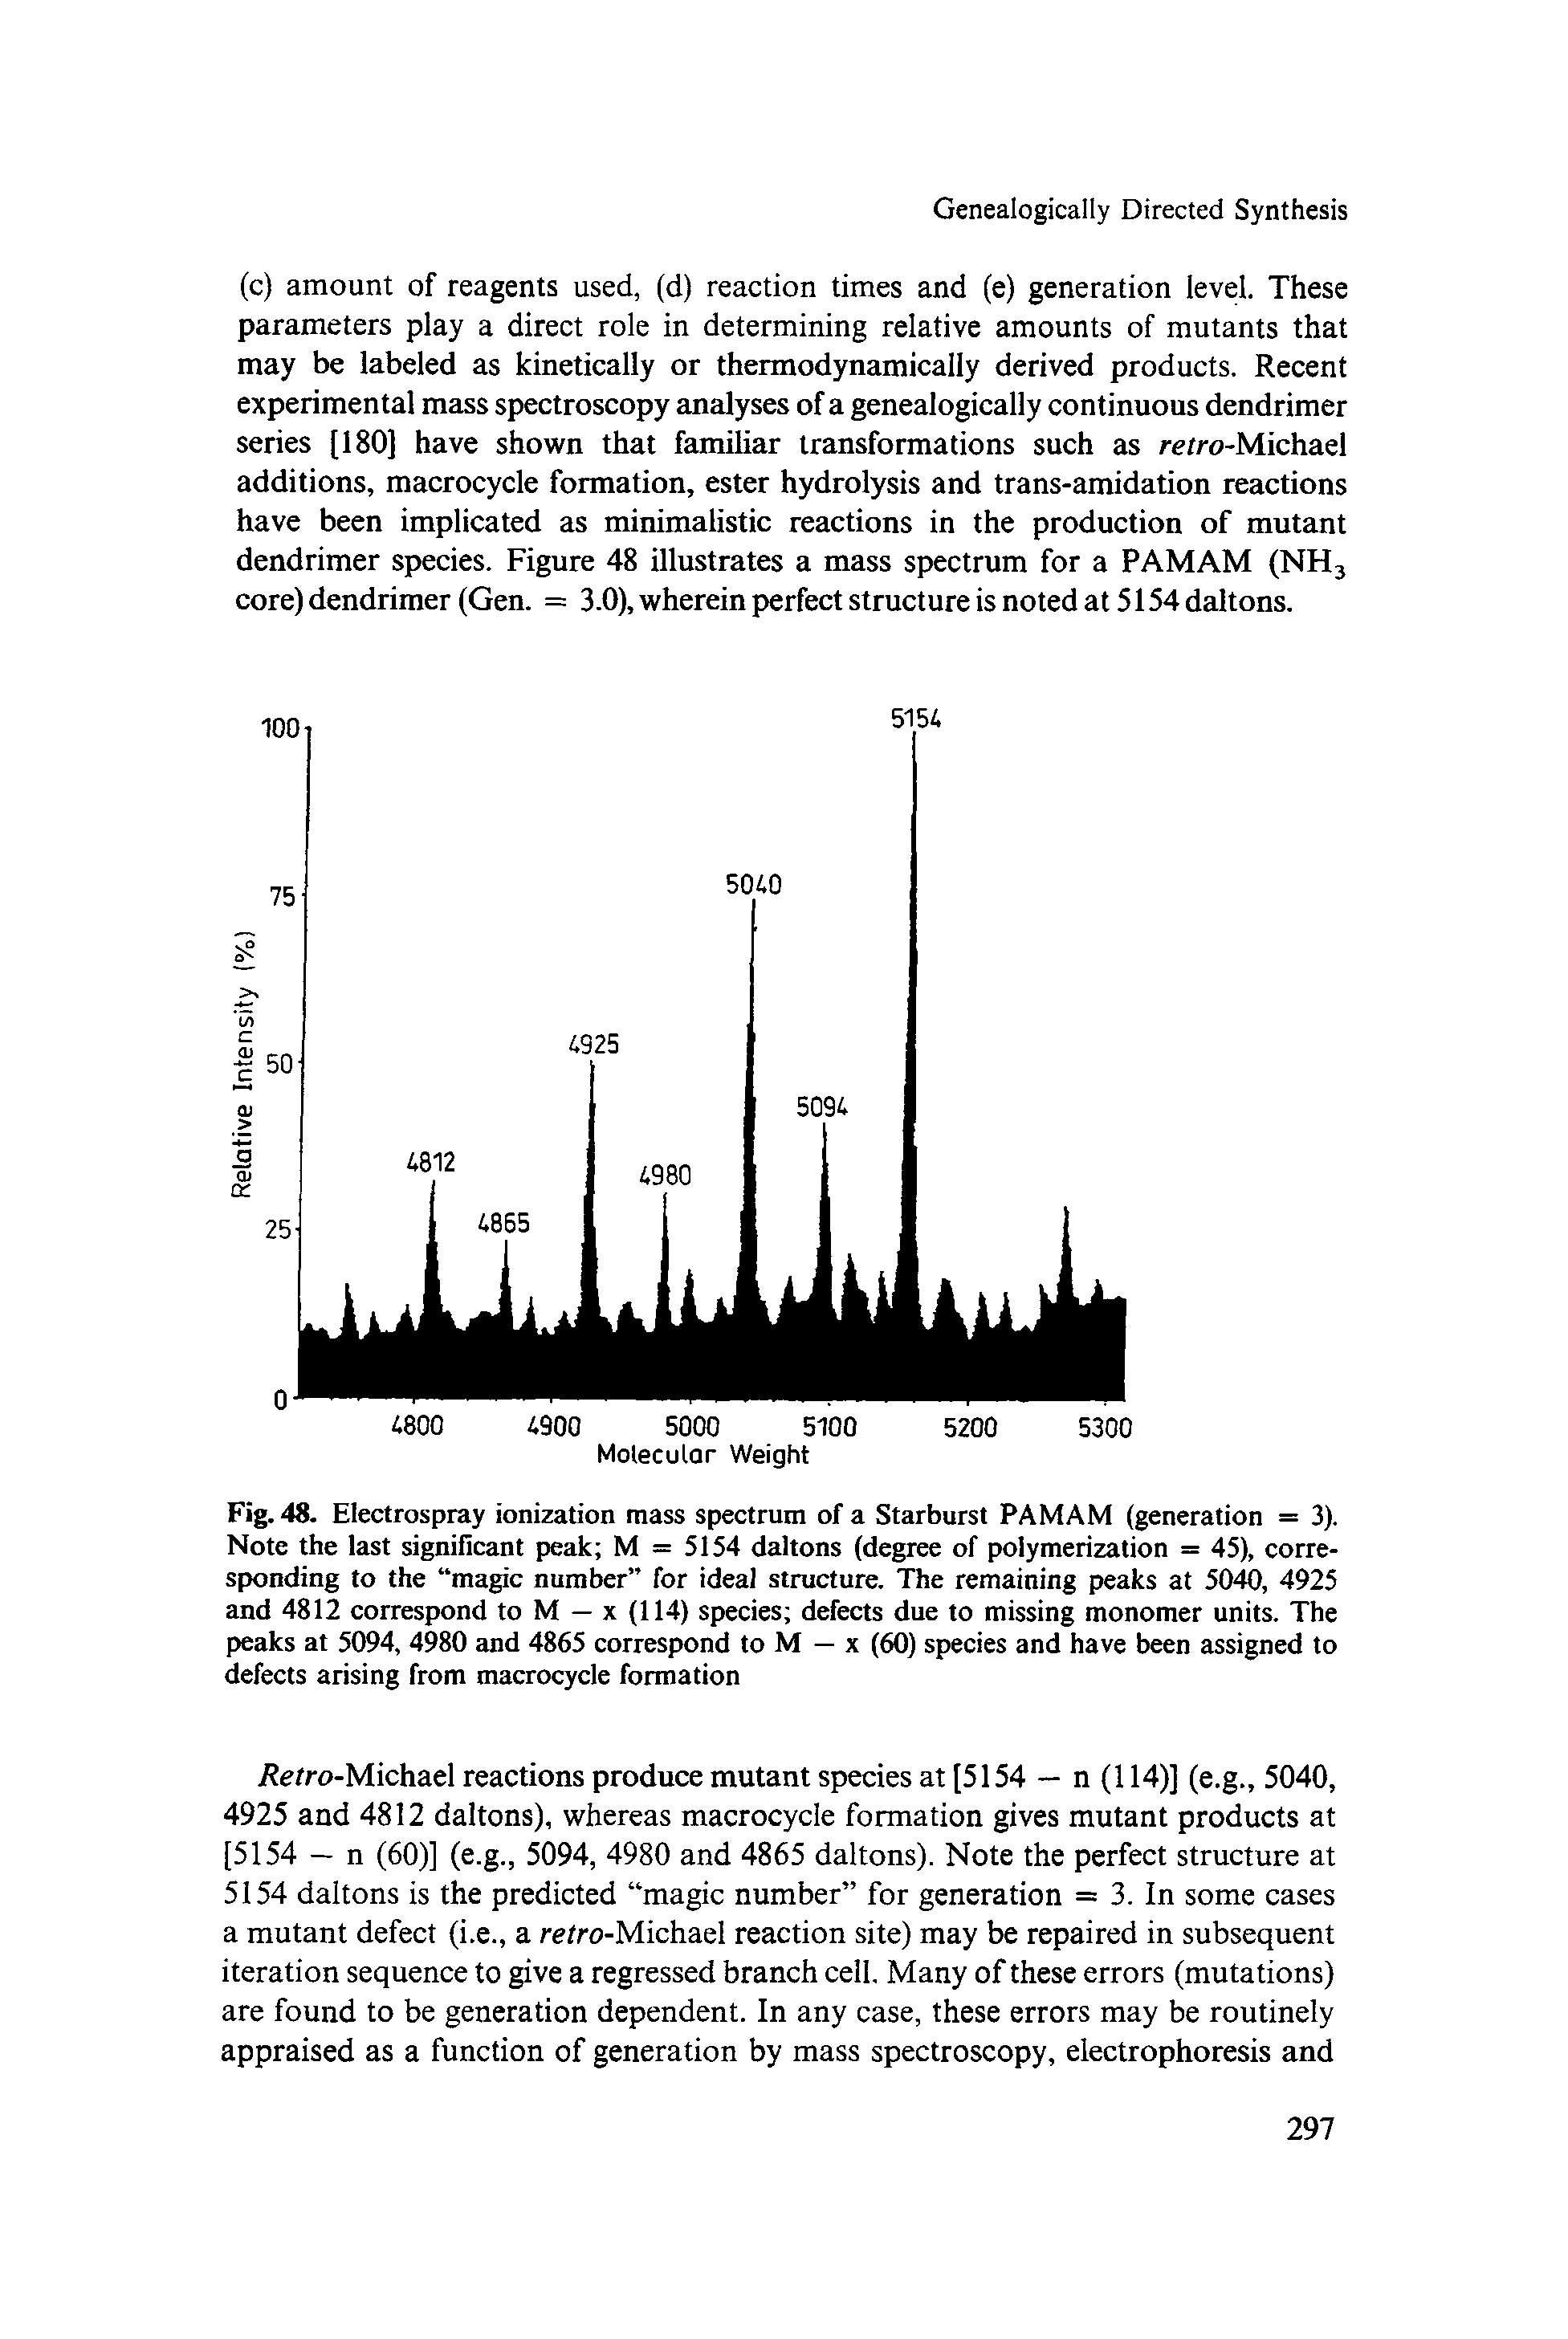 Fig. 48. Electrospray ionization mass spectrum of a Starburst PAMAM (generation = 3). Note the last significant peak M = 5154 daltons (degree of polymerization = 45), corresponding to the magic number for ideal structure. The remaining peaks at 5040, 4925 and 4812 correspond to M — x (114) species defects due to missing monomer units. The peaks at 5094, 4980 and 4865 correspond to M — x (60) species and have been assigned to defects arising from macrocycle formation...